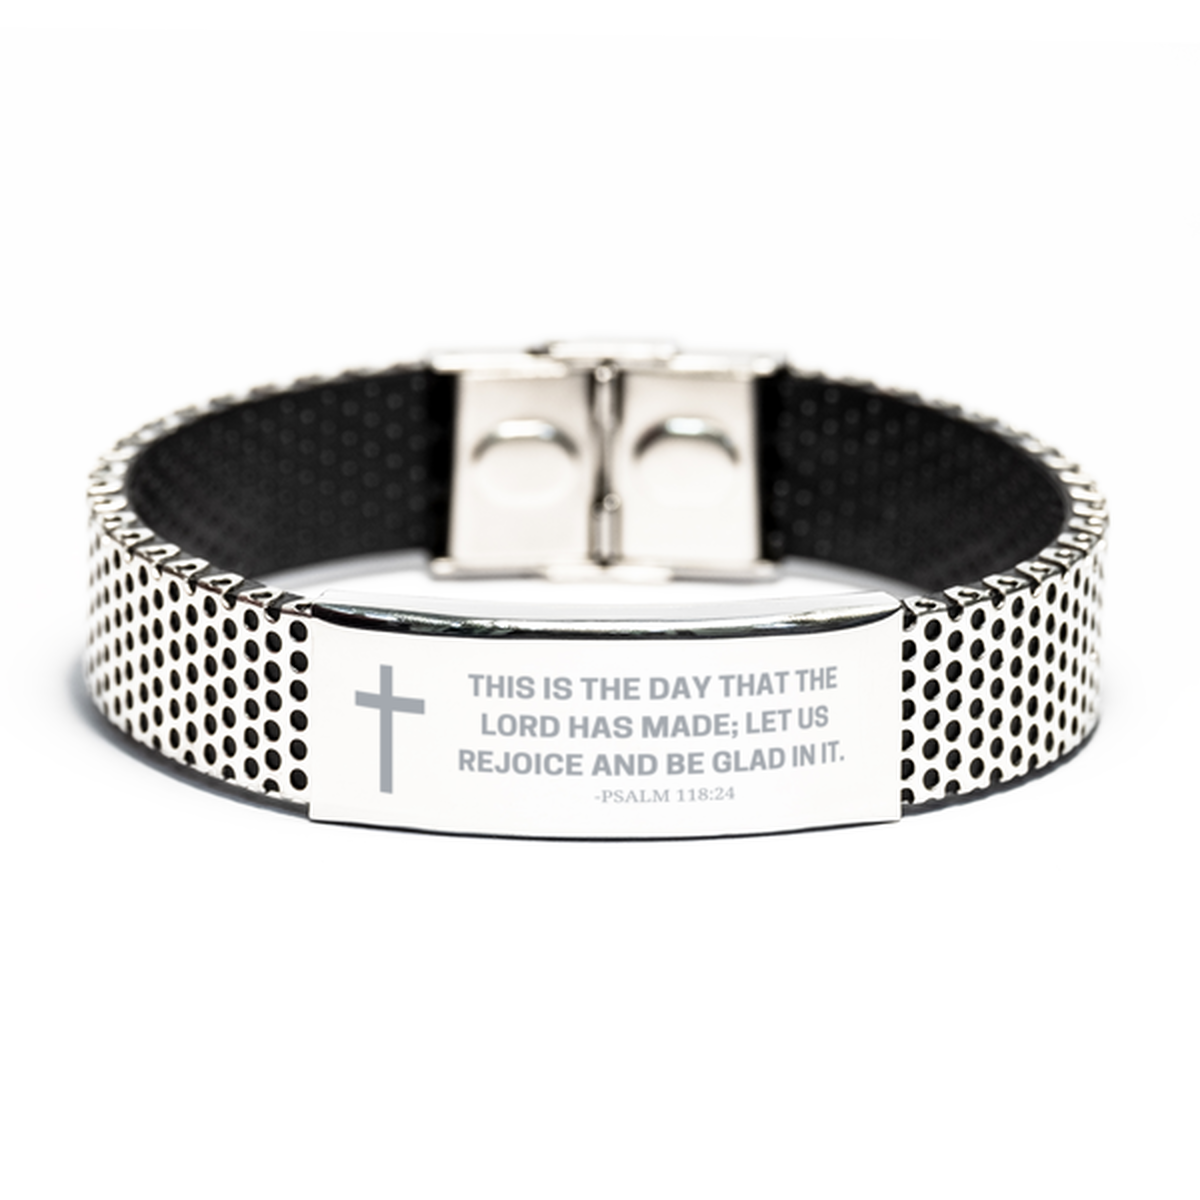 Baptism Gifts For Teenage Boys Girls, Christian Bible Verse Stainless Steel Bracelet, This is the day that the lord has made, Catholic Confirmation Gifts for Son, Godson, Grandson, Nephew